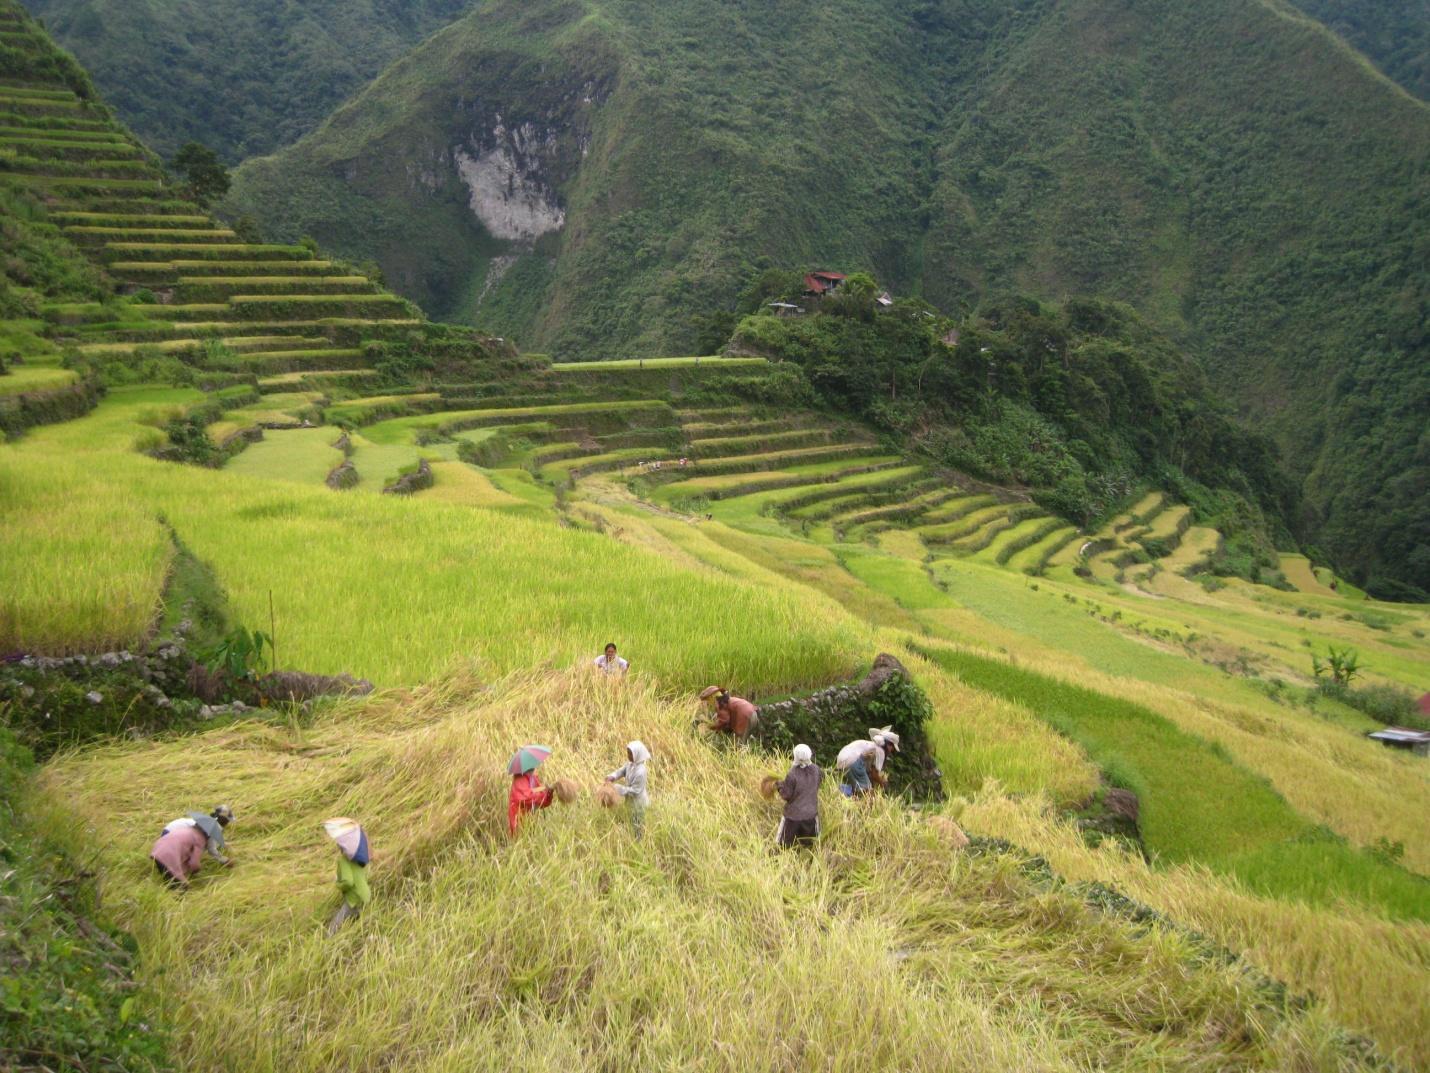 terraced hillsides in the Philippines with figures bending over stands of rice stalks